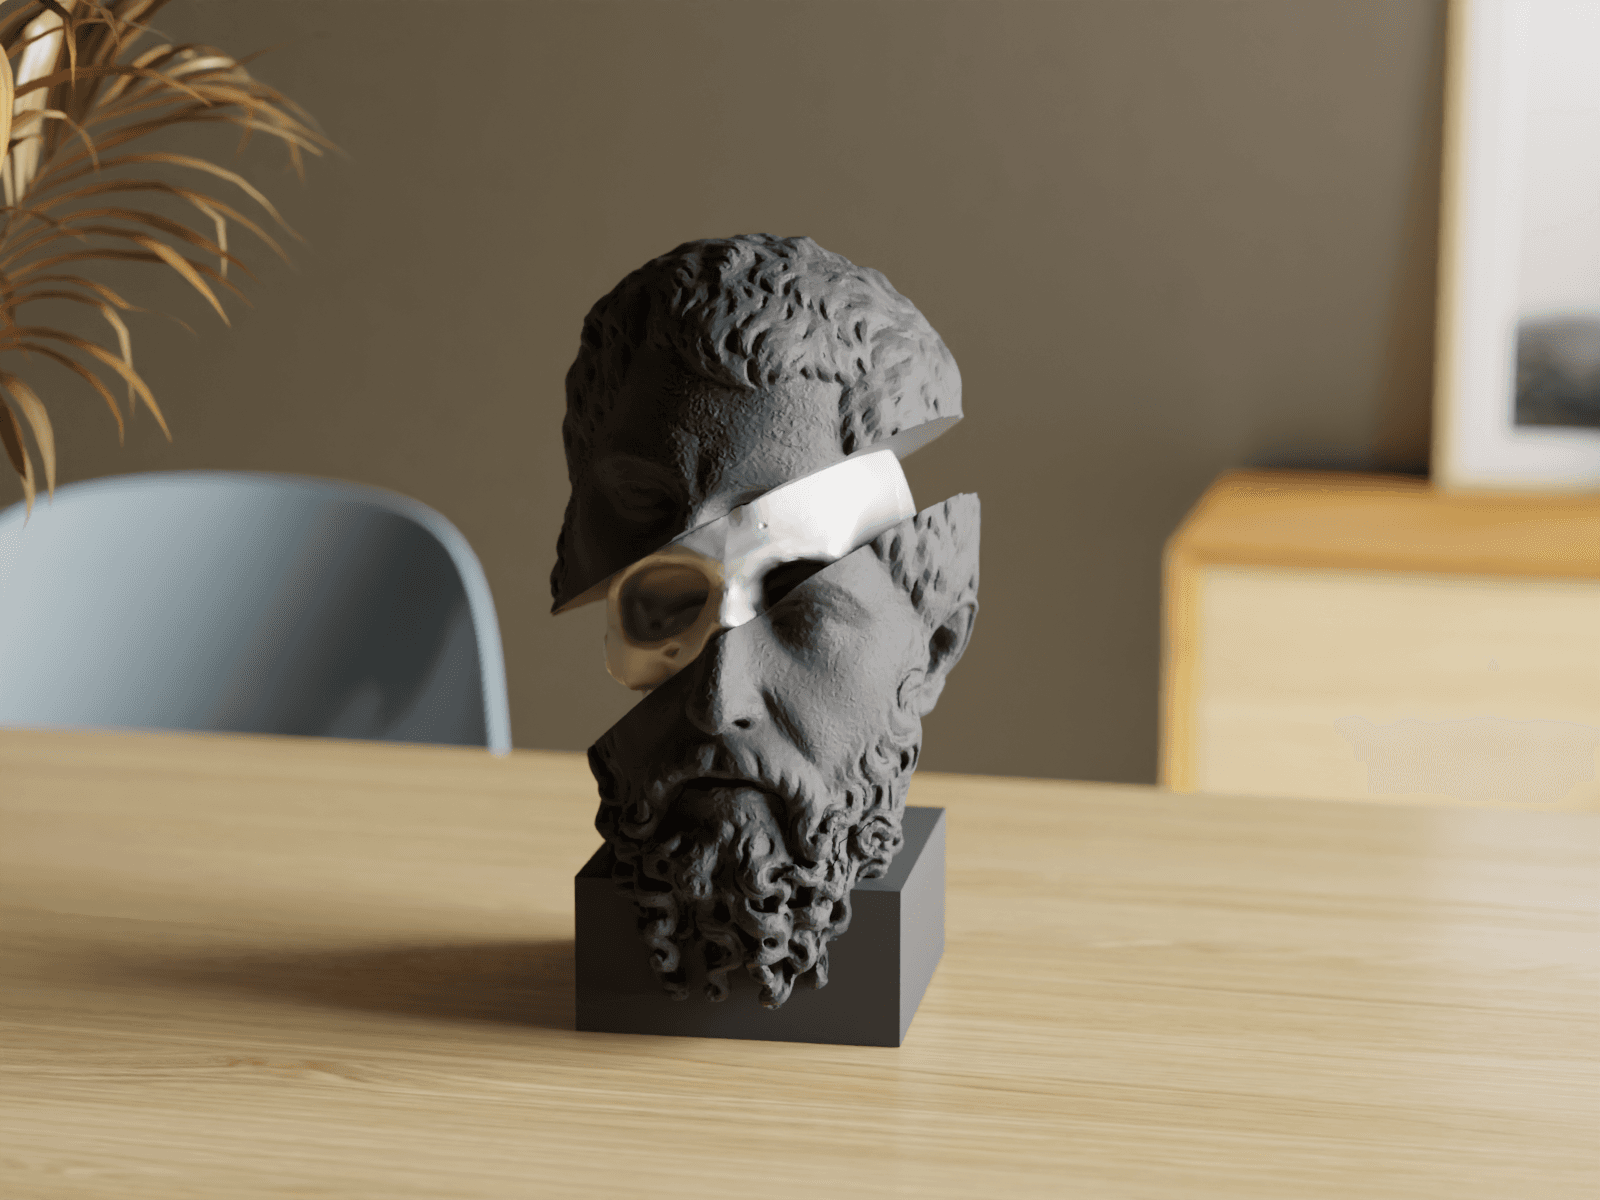  Insight Unveiled: Abstract Sculpture of Socrates 3d model